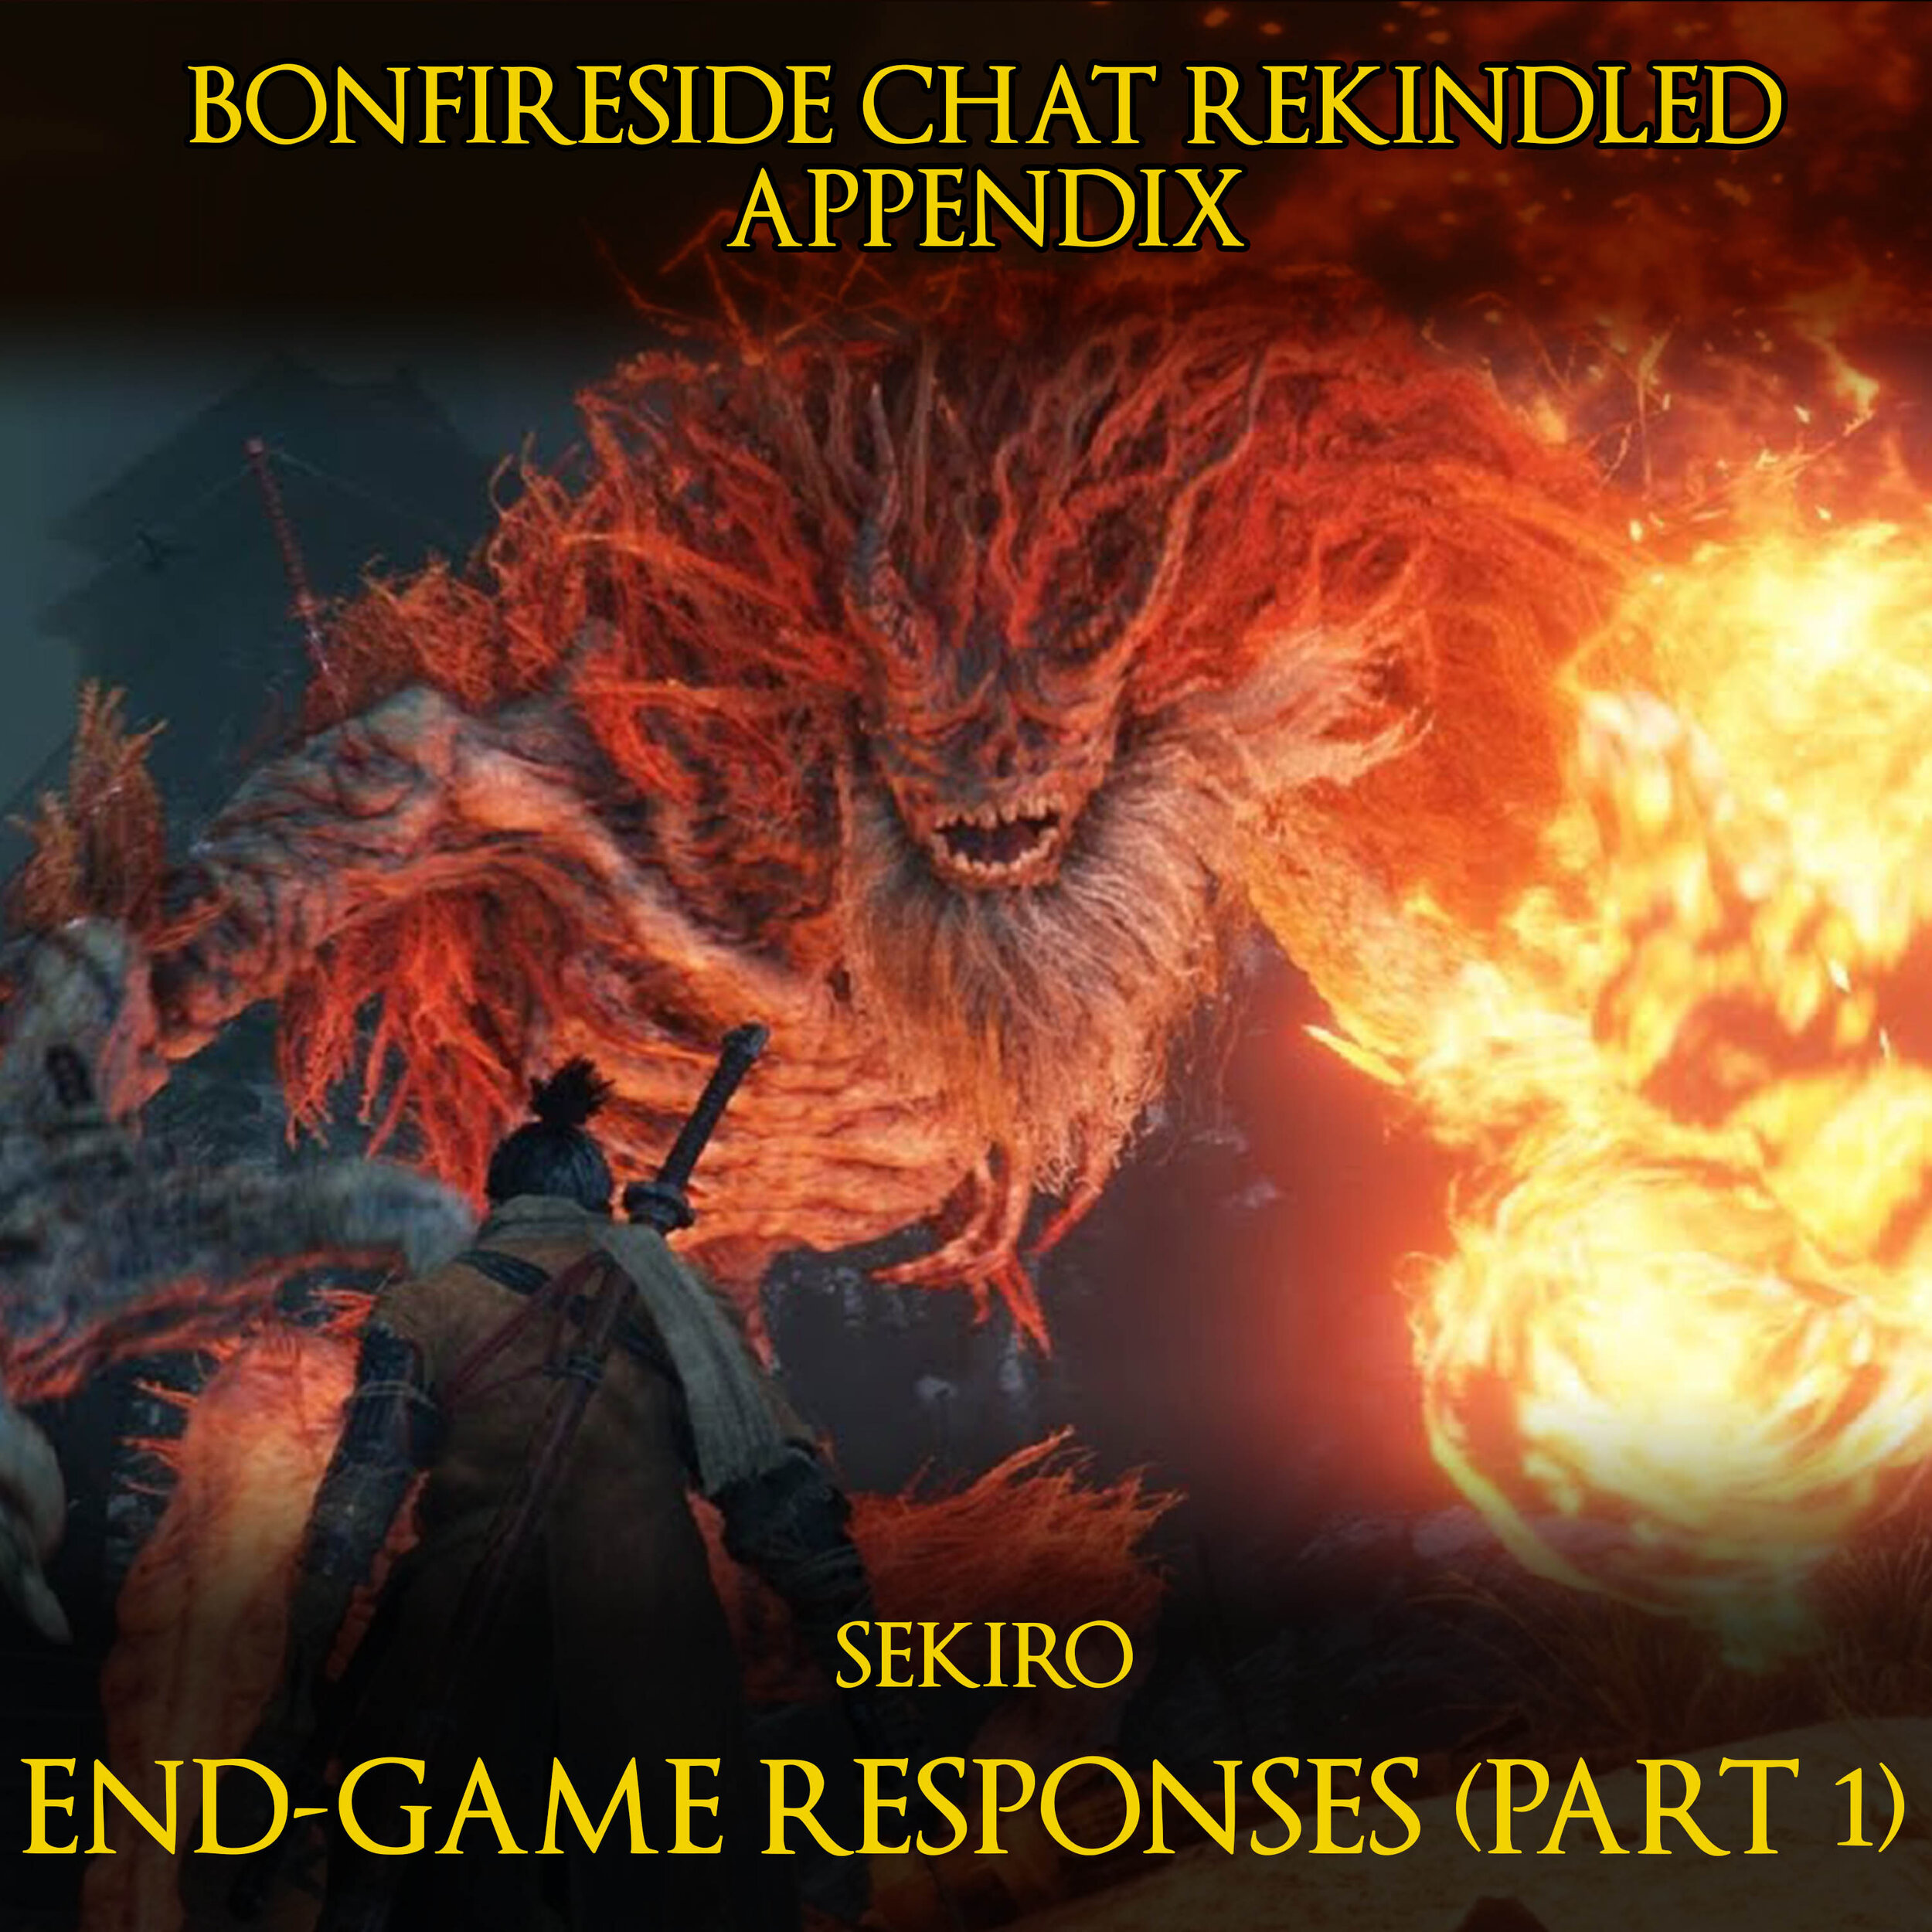 End-Game Responses (Part 2)